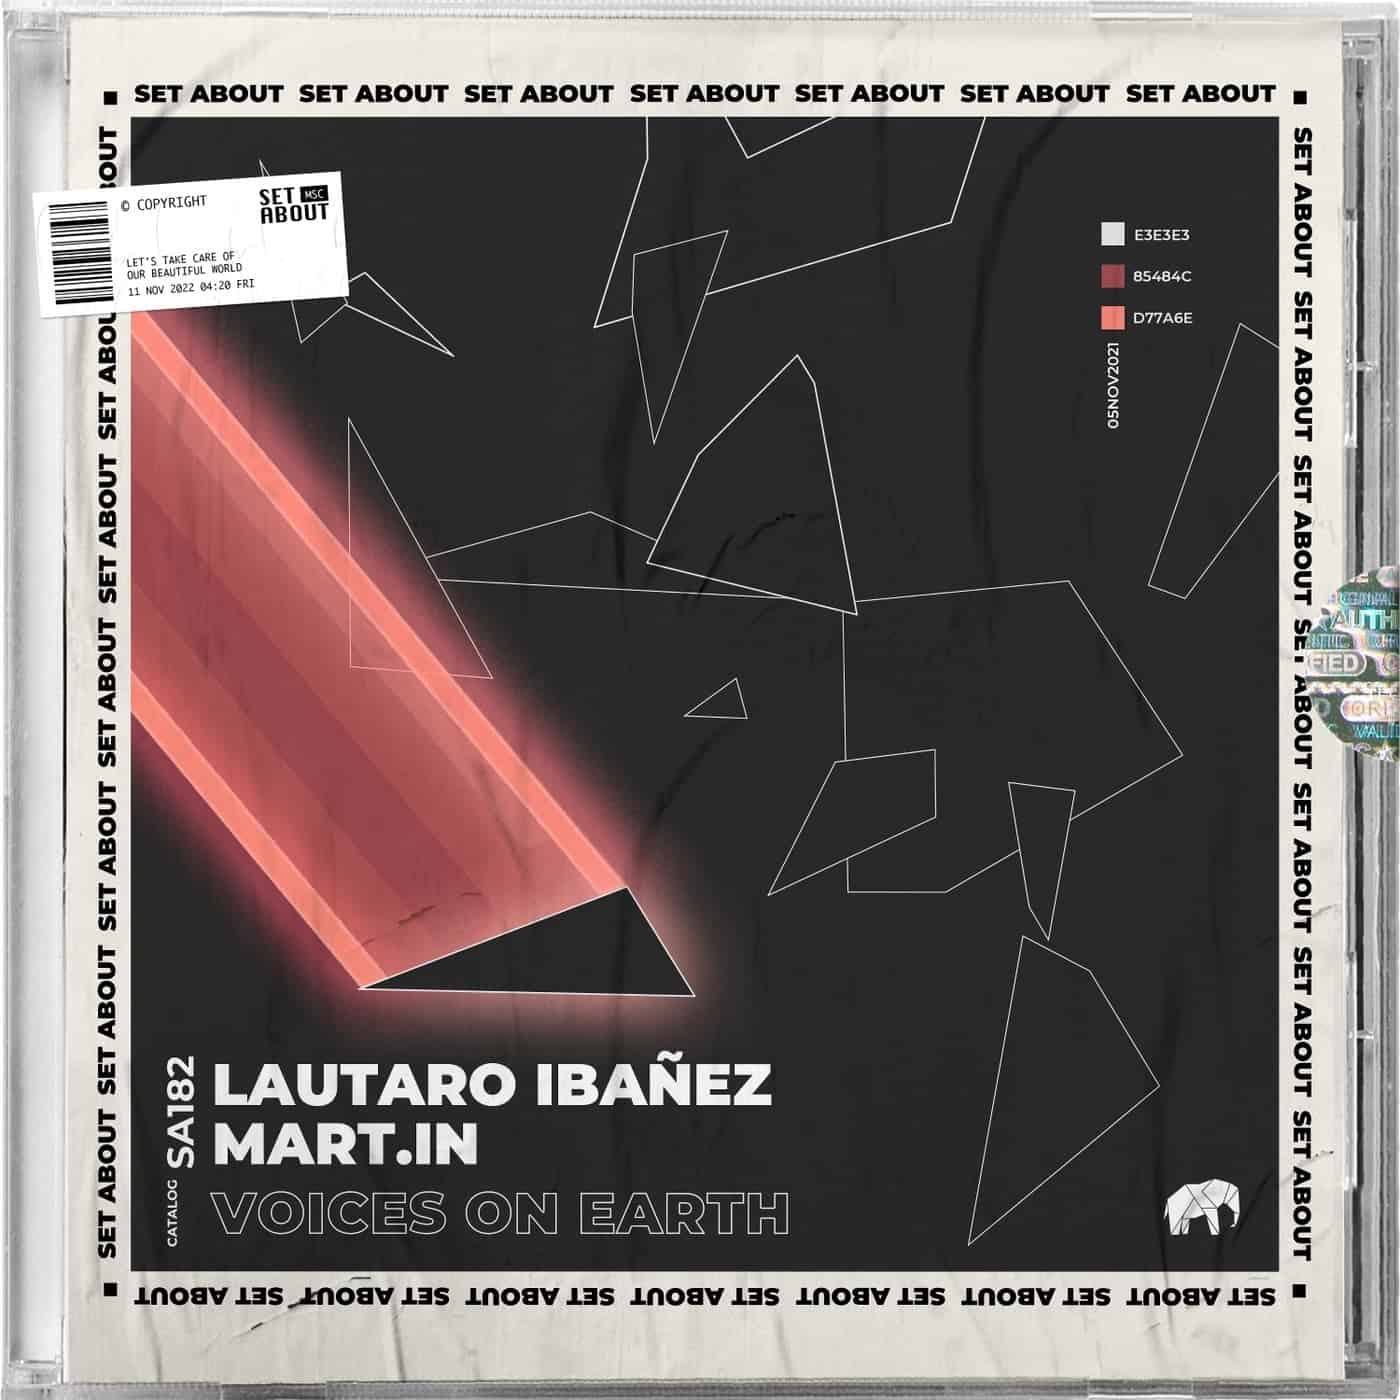 Download Lautaro Ibañez, Mart.in - Voices on Earth on Electrobuzz